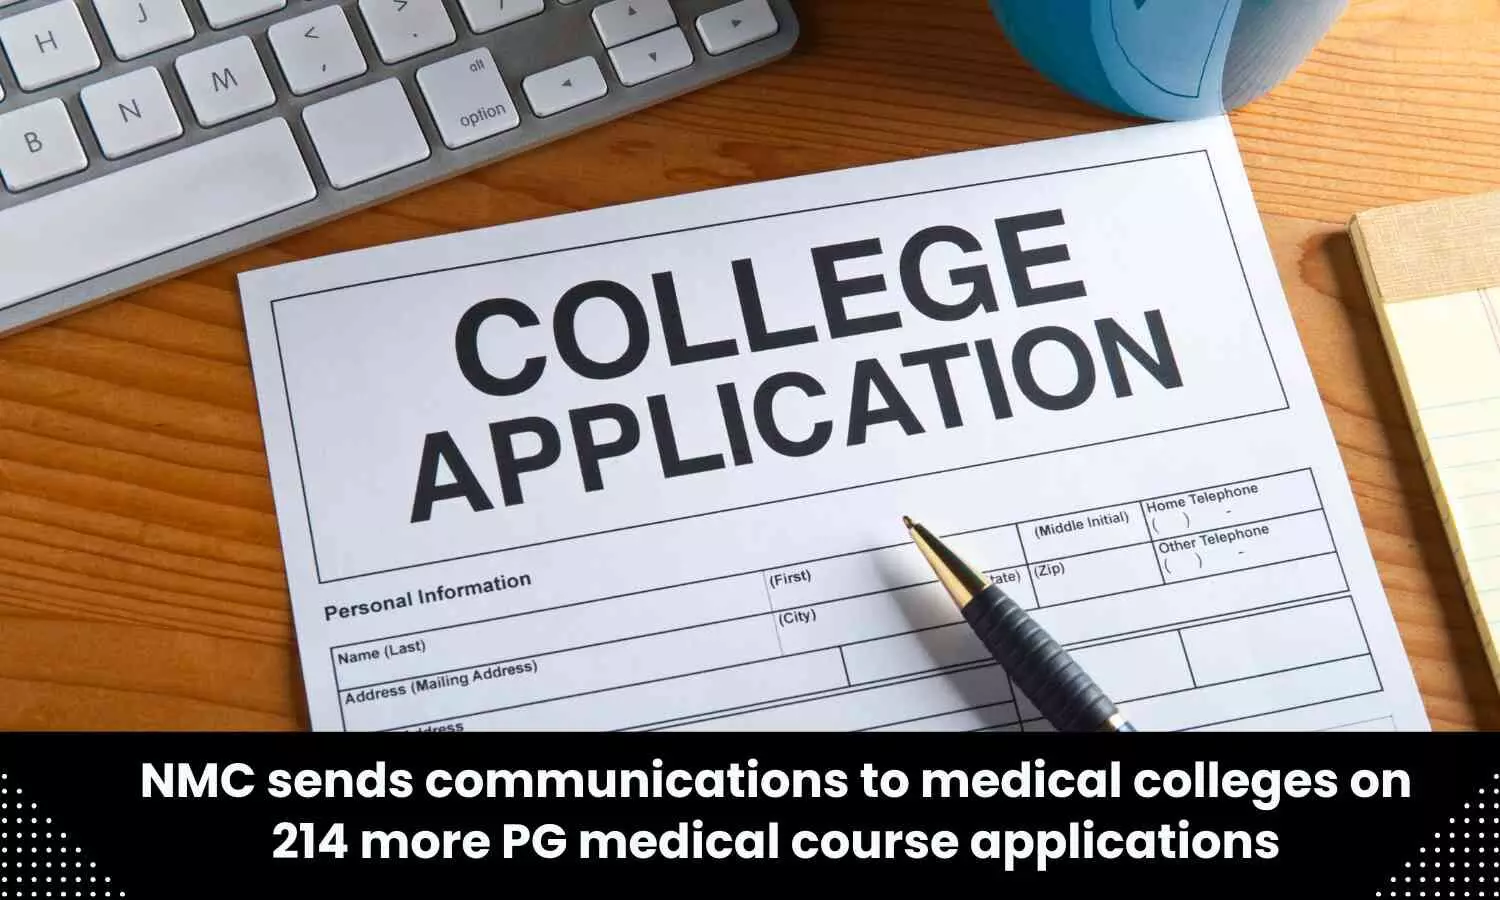 NMC sends communication to medical colleges on 214 more applications to begin new PG medical courses, seat increase